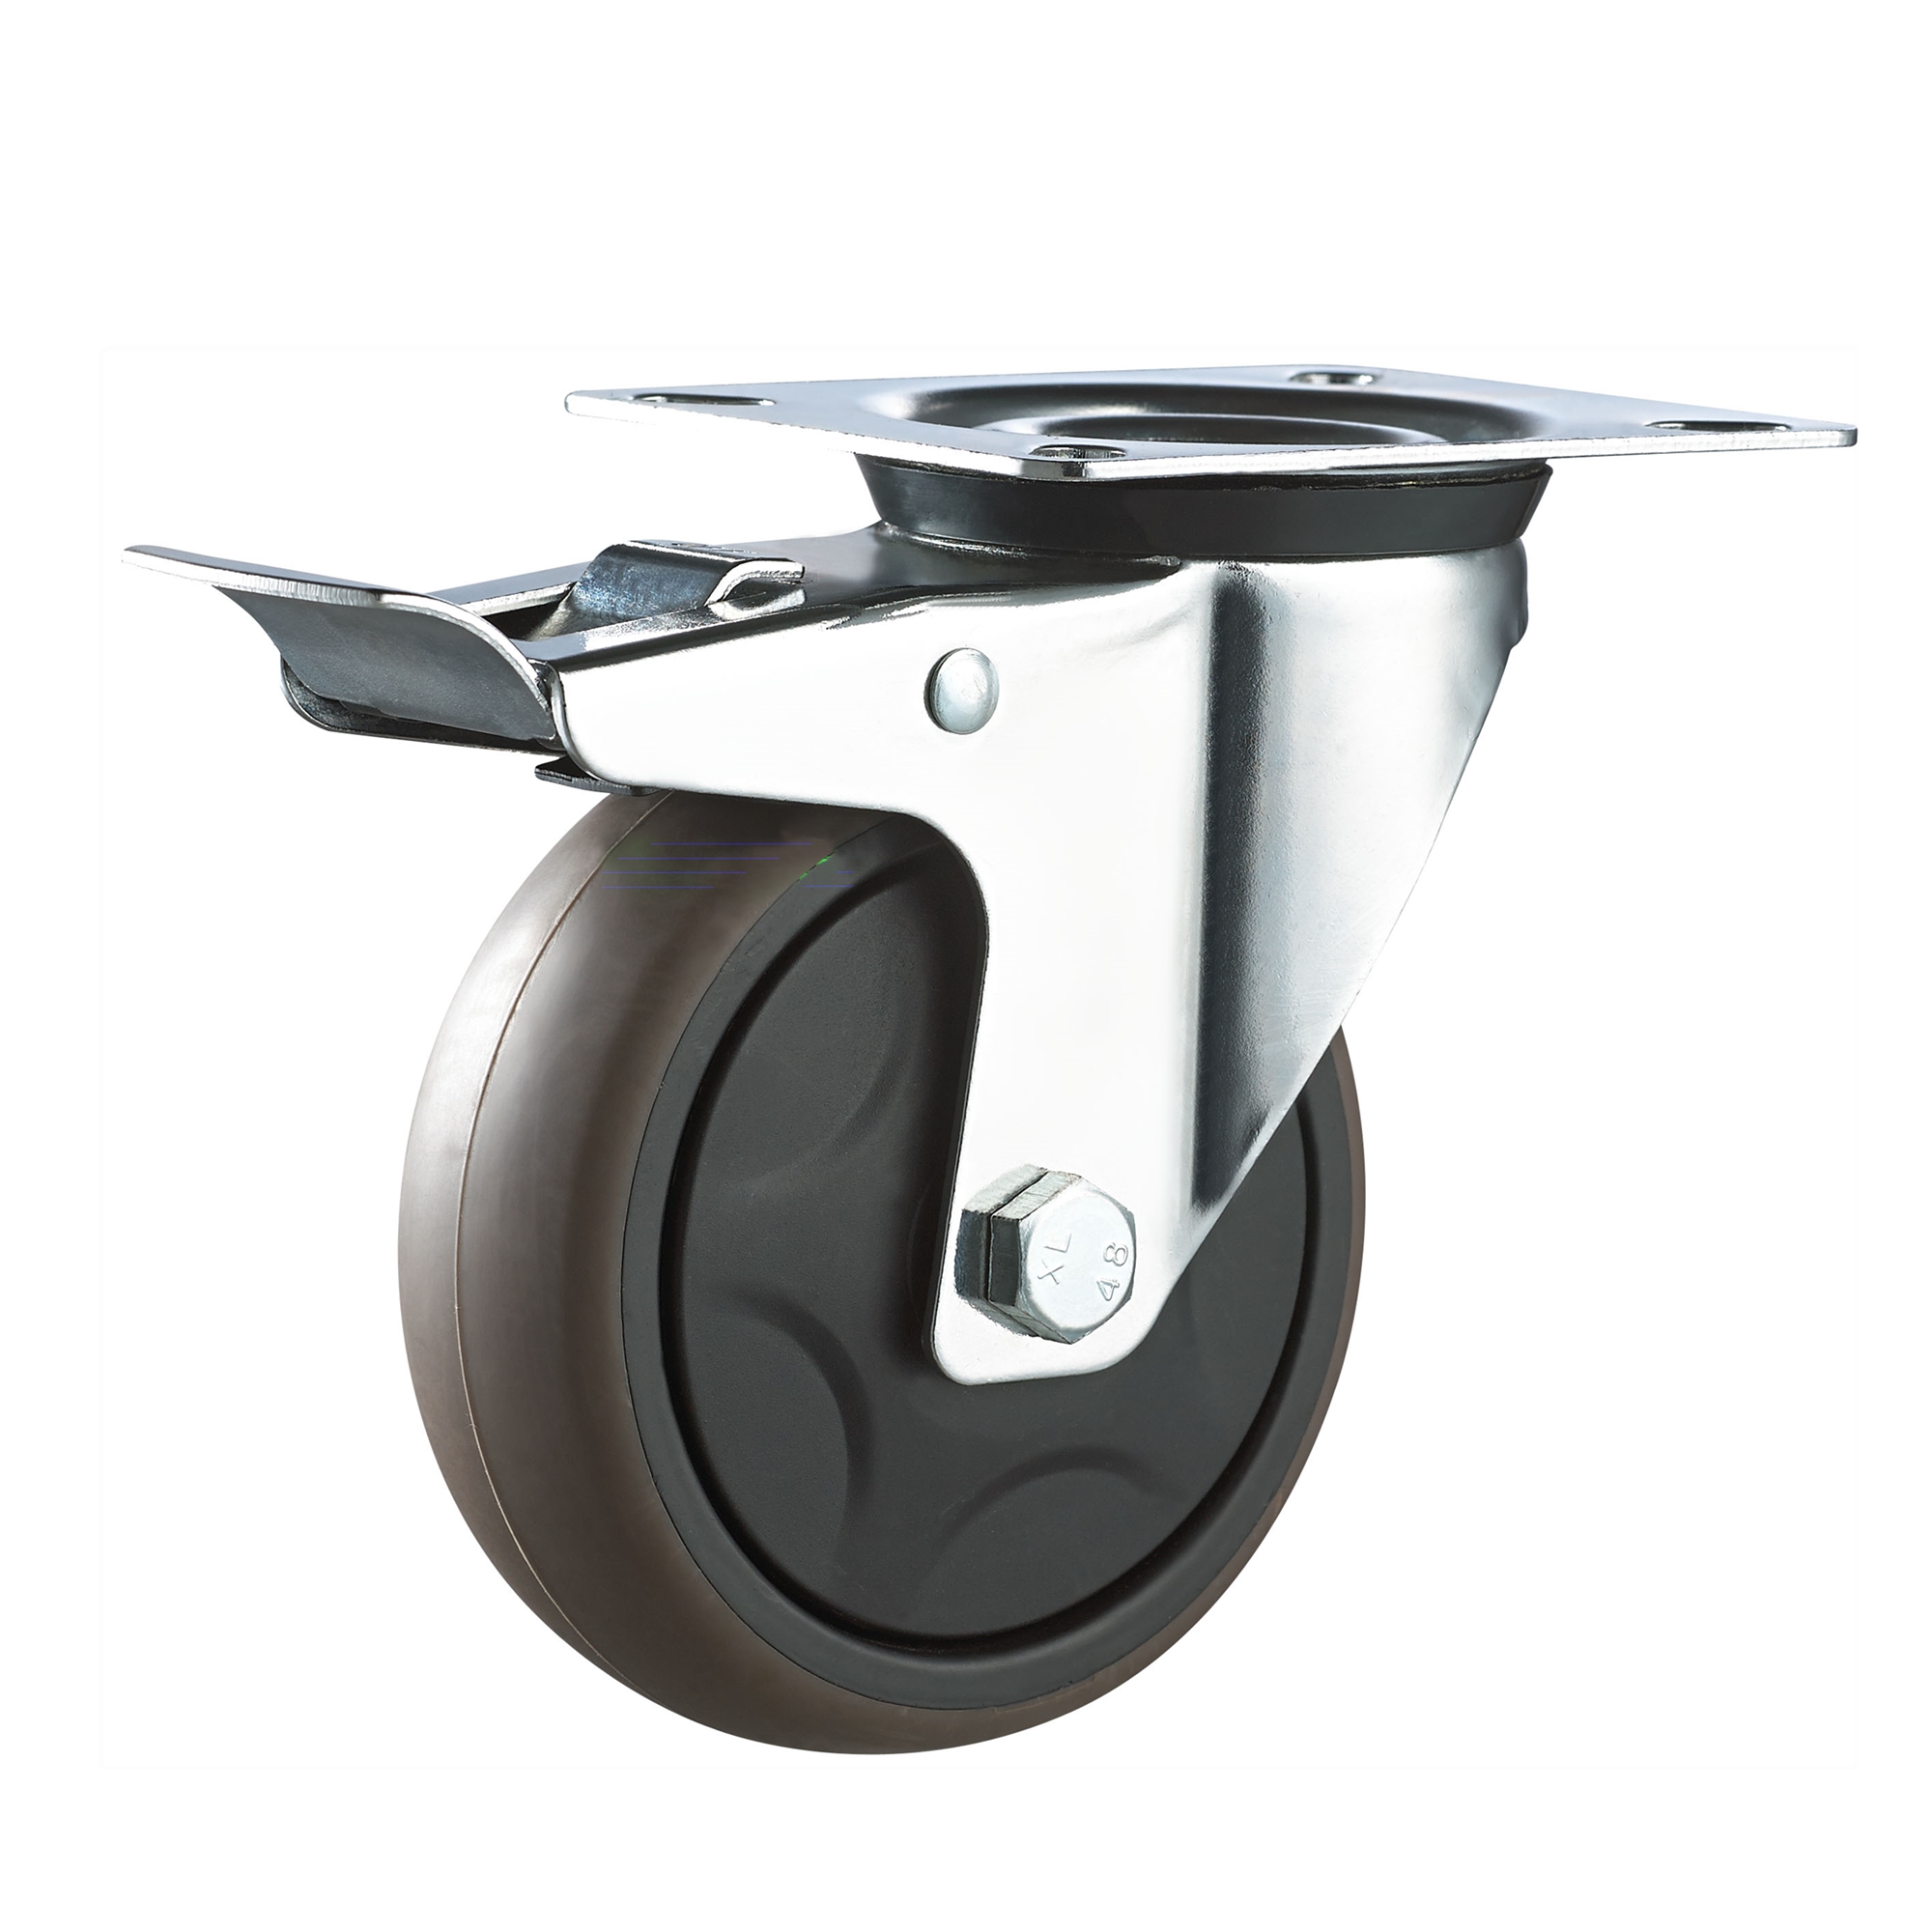 Competitive Price Industrial Trolley 100 mm 4 Inch Non Marking Total Brake TPR Swivel Plate Caster Wheel